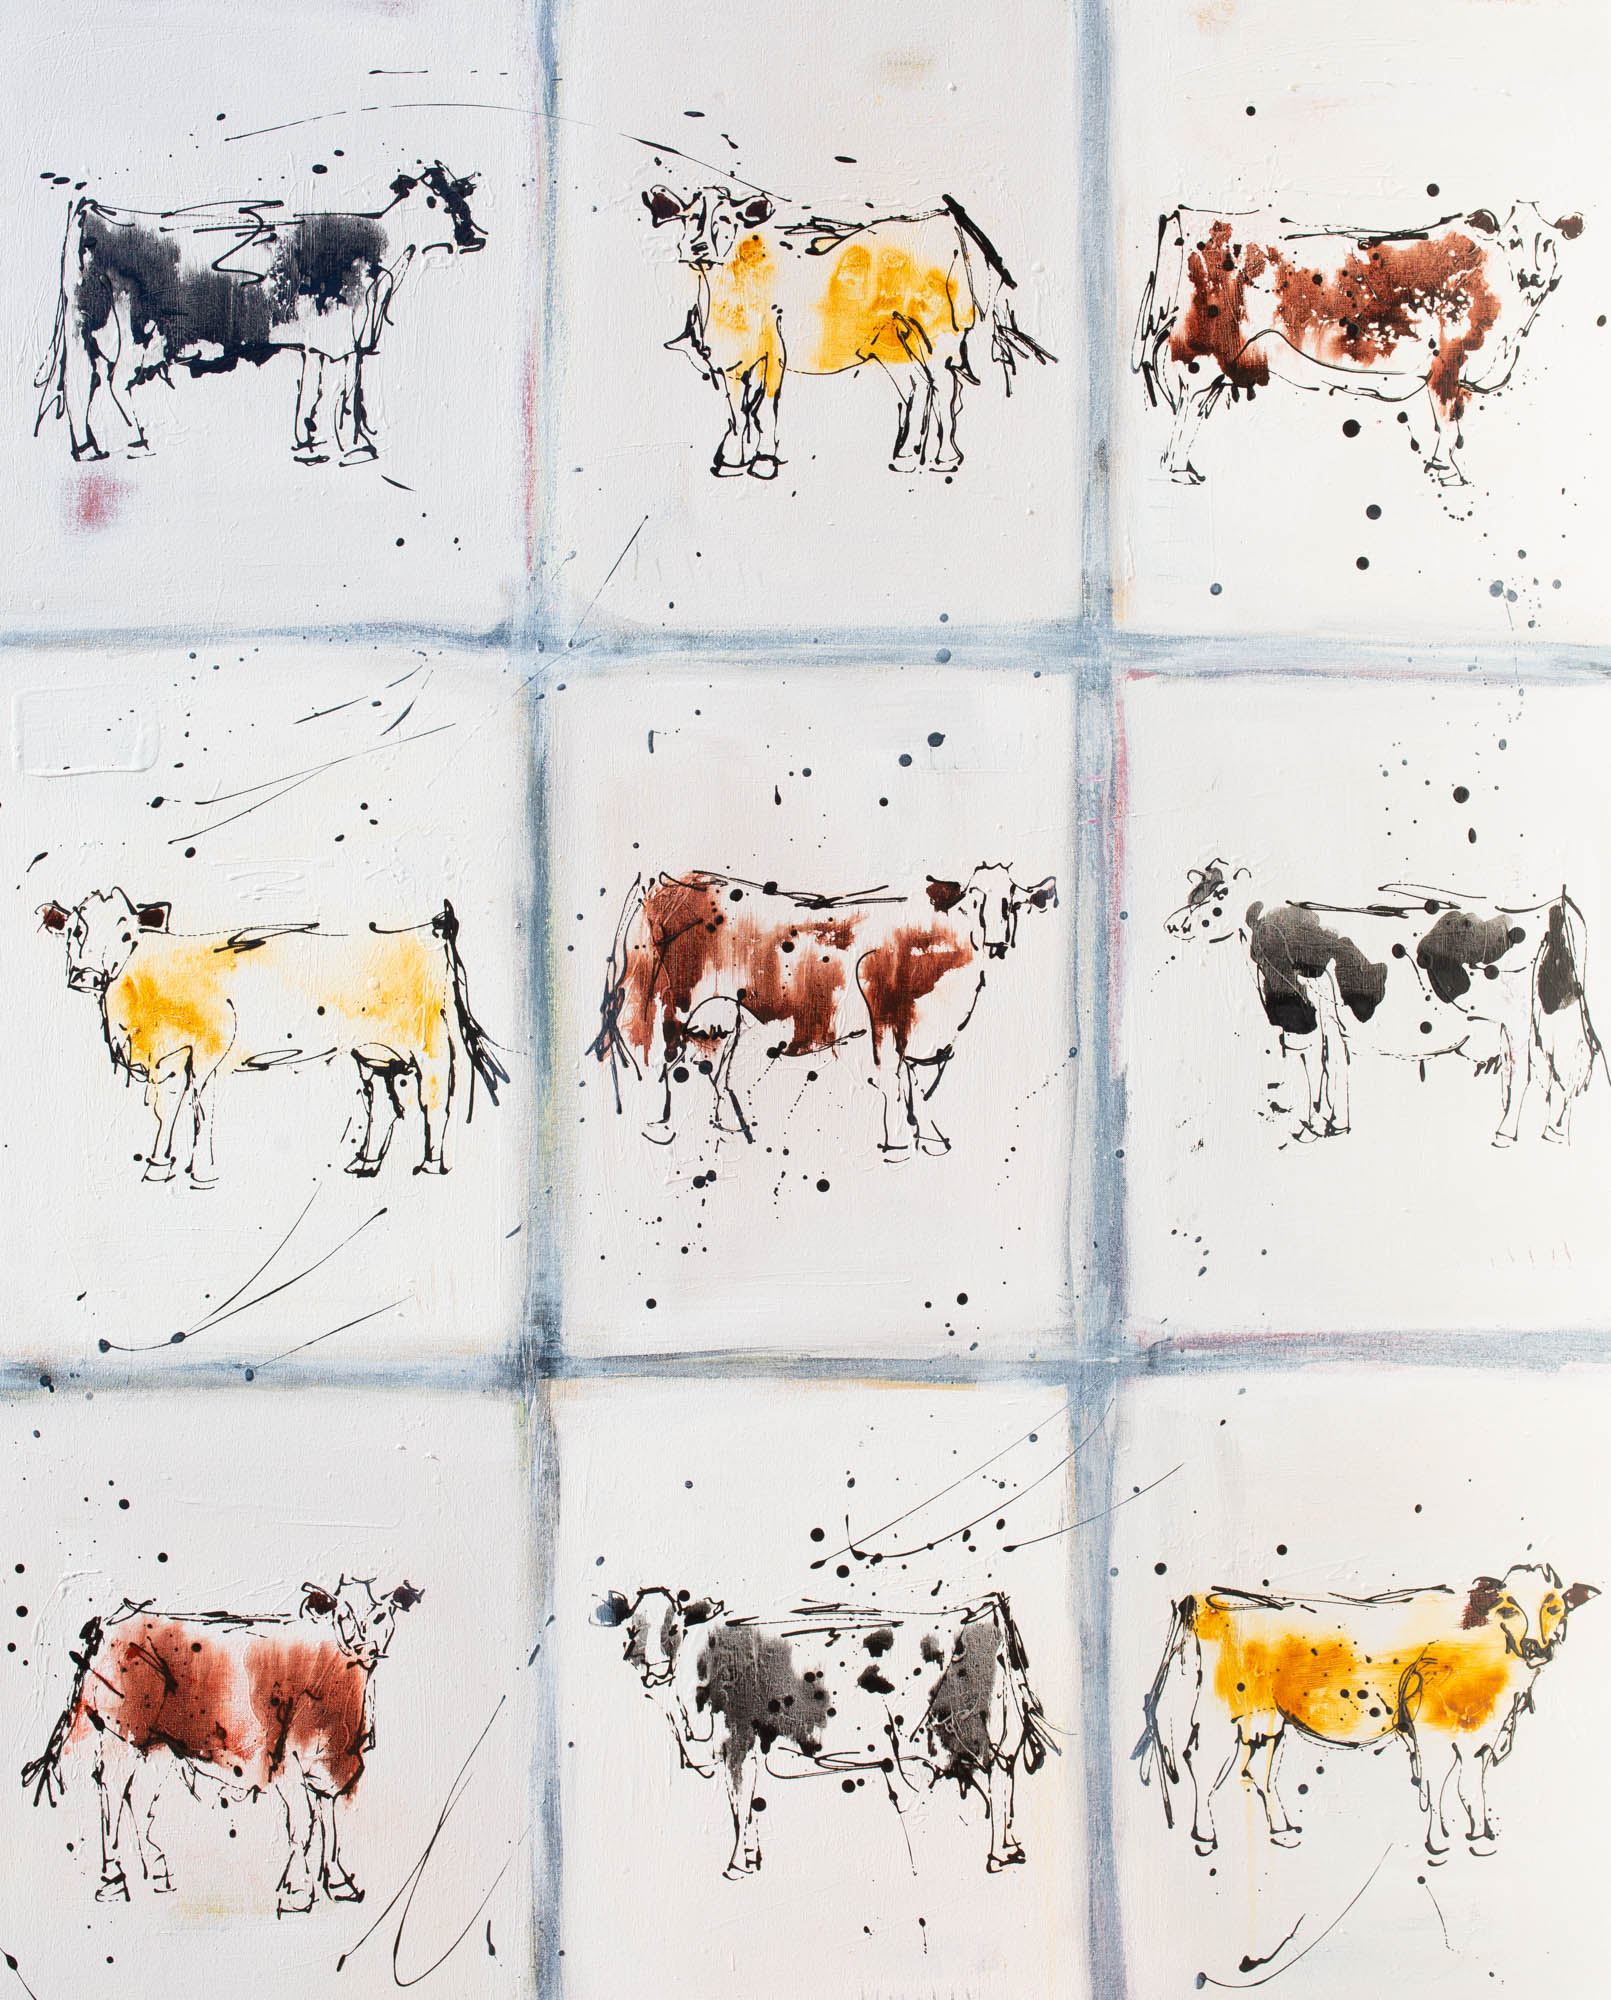 27 Friends  - Abstract Cow by Australian Artist Rose Hewartson Original Abstract Painting on Canvas Framed 96x123 cm Statement Piece